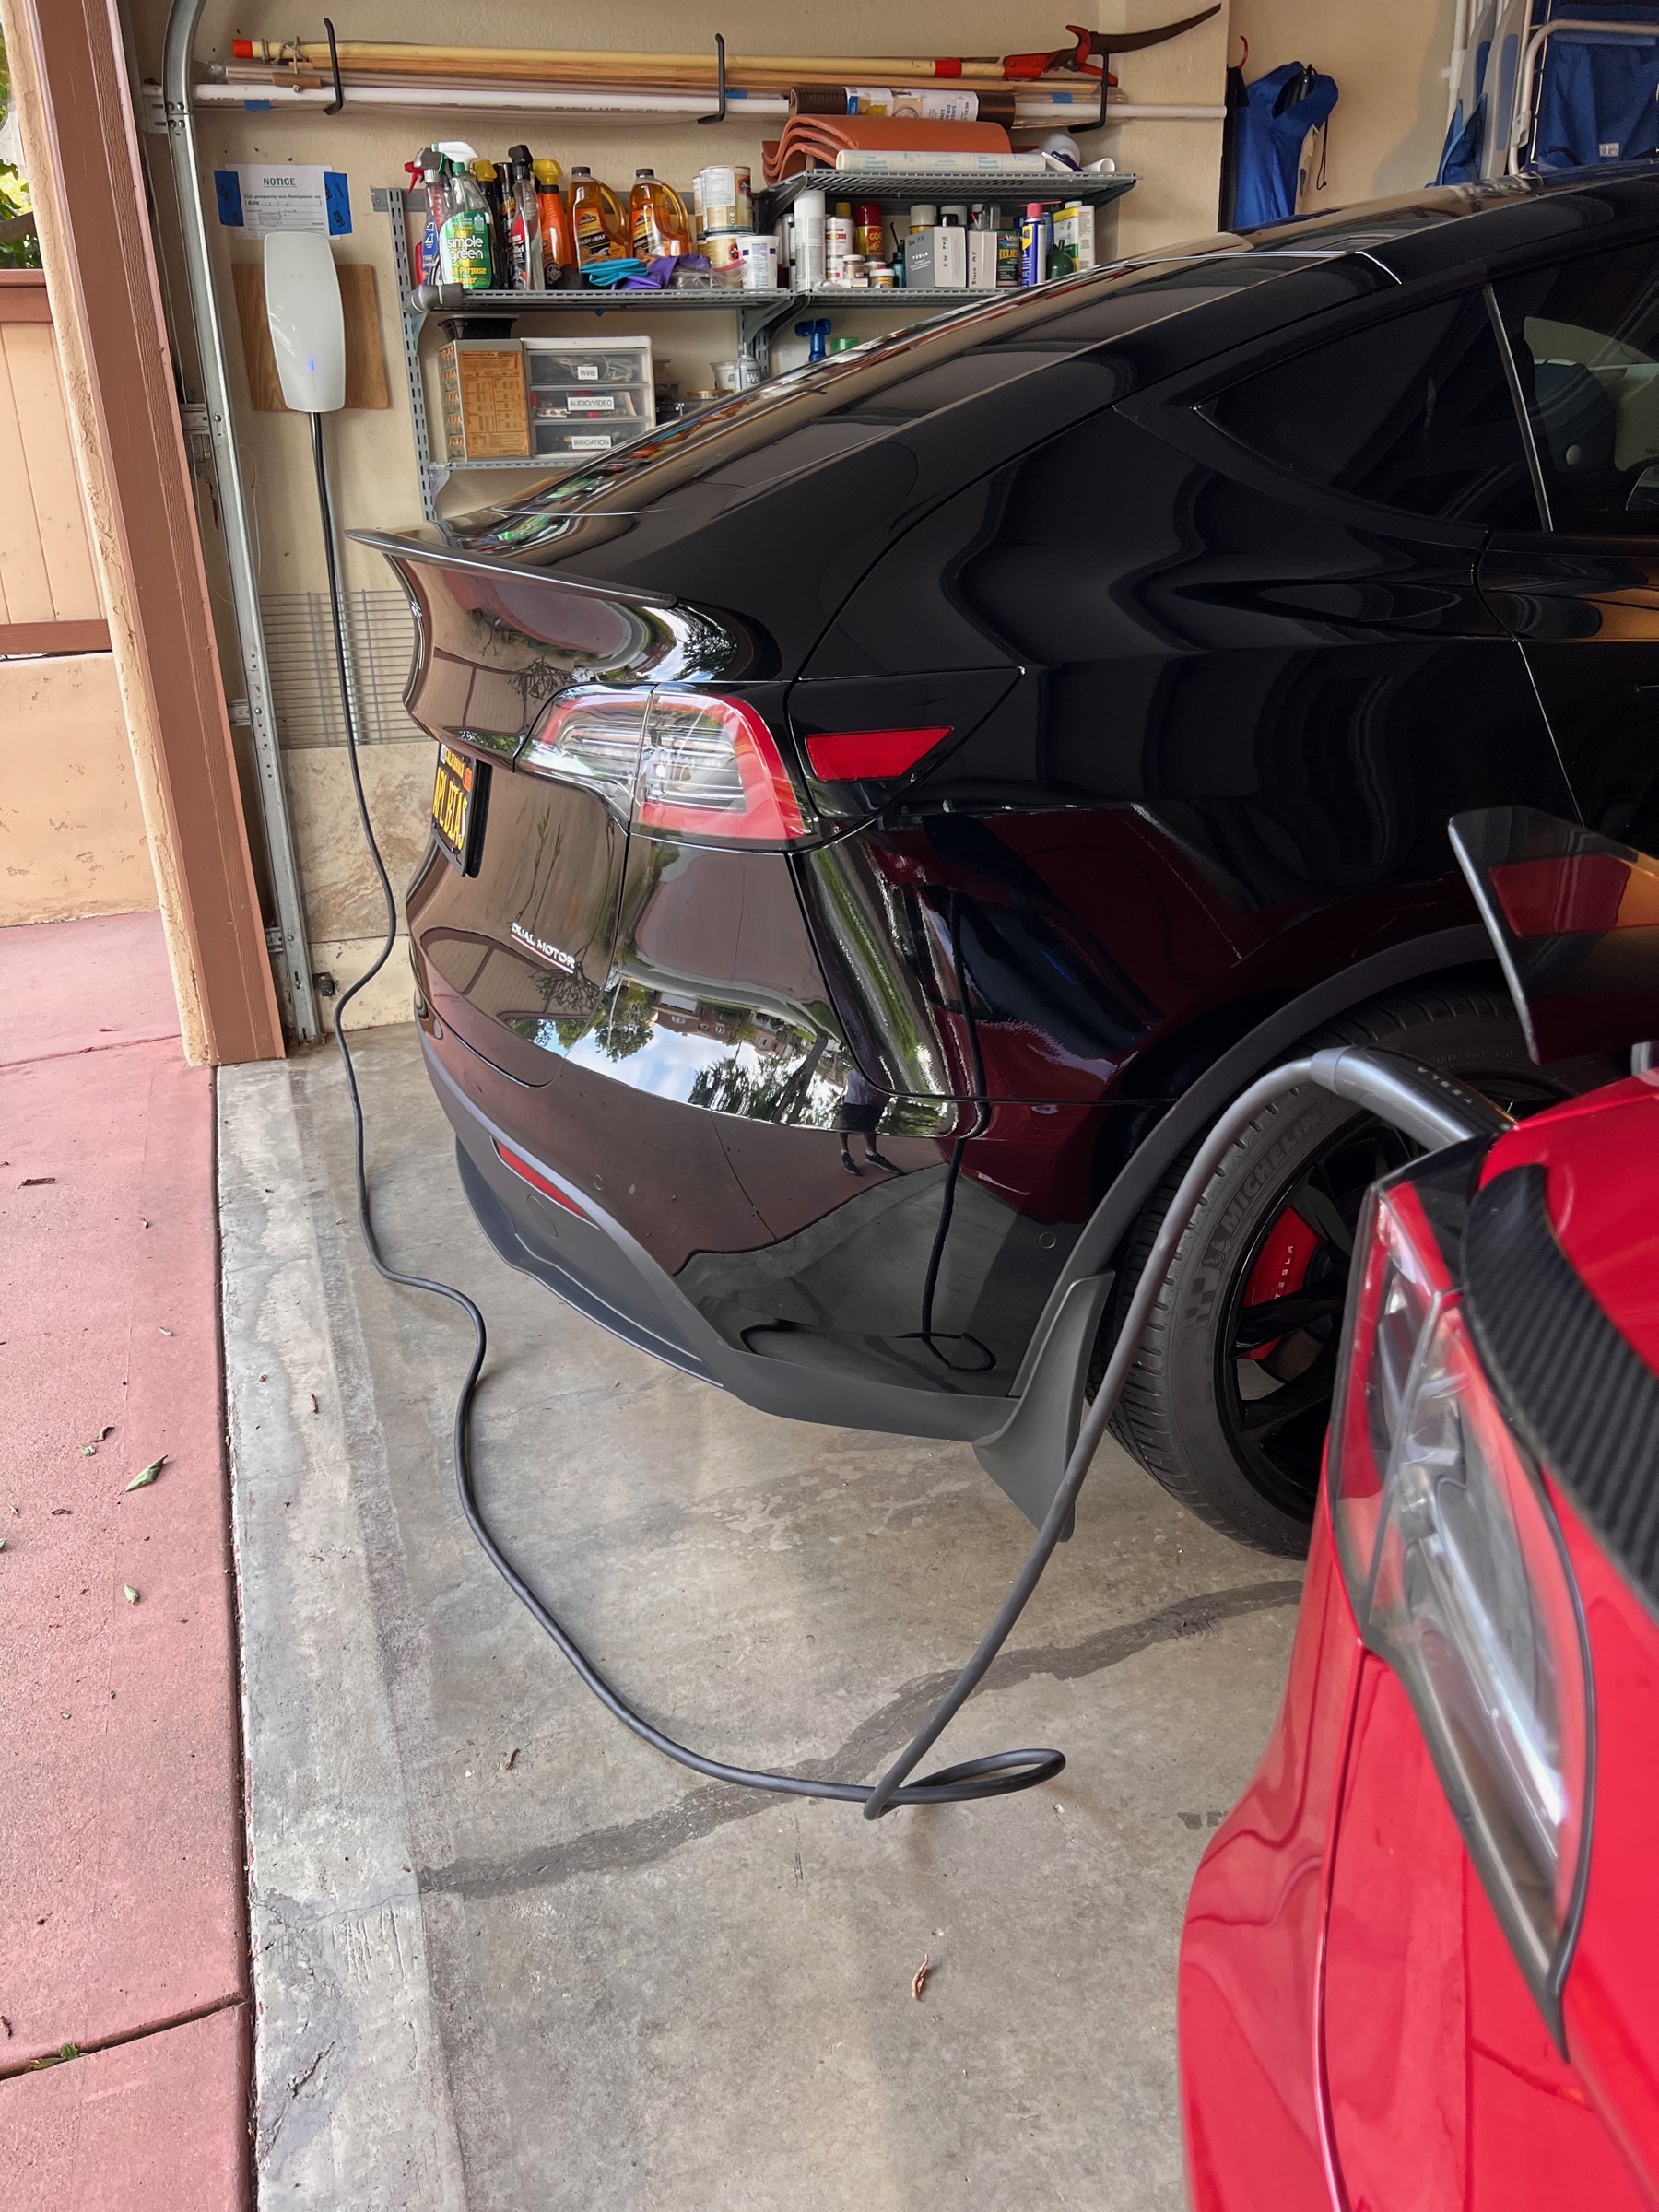 Tesla walll charger next to Steve's Black Model Y with Cable Dragged Over to My Red Model 3